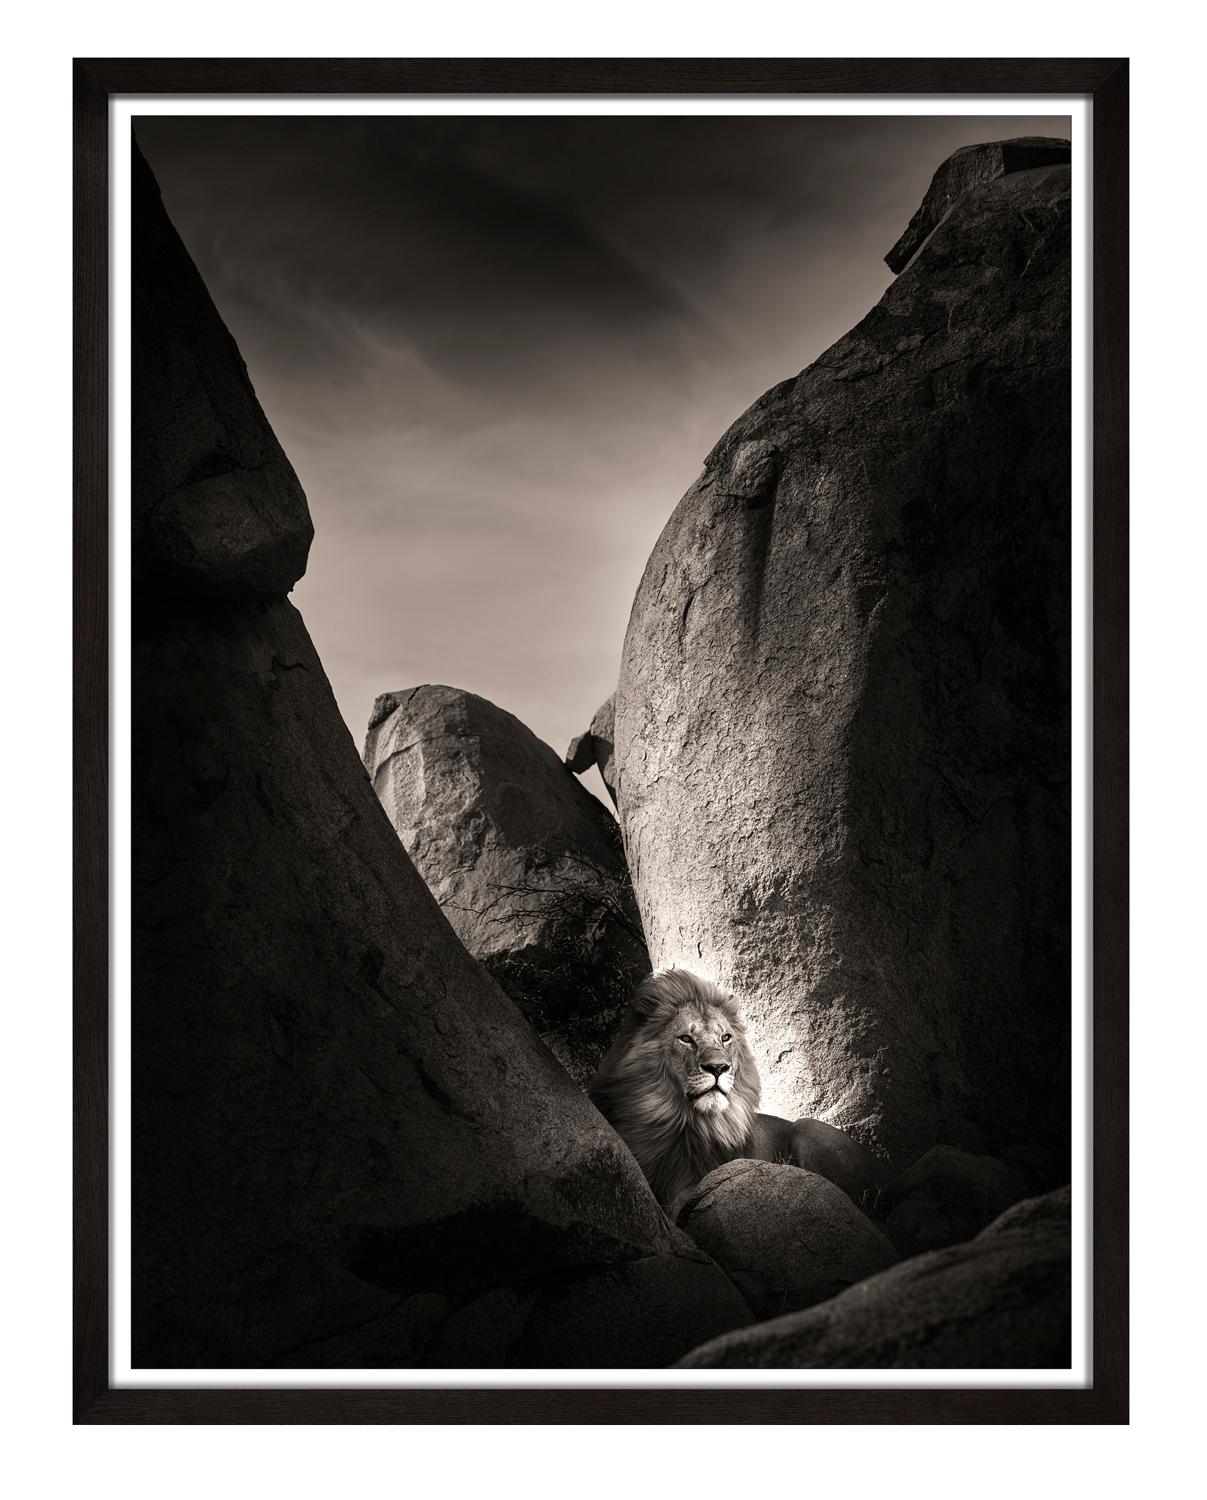 Edition of 7
more sizes on request

A big majestic male lion between the rocks.

Joachim Schmeisser is represented by leading Galleries worldwide. His photographs are among the most sought-after and best-selling works in this genre worldwide and